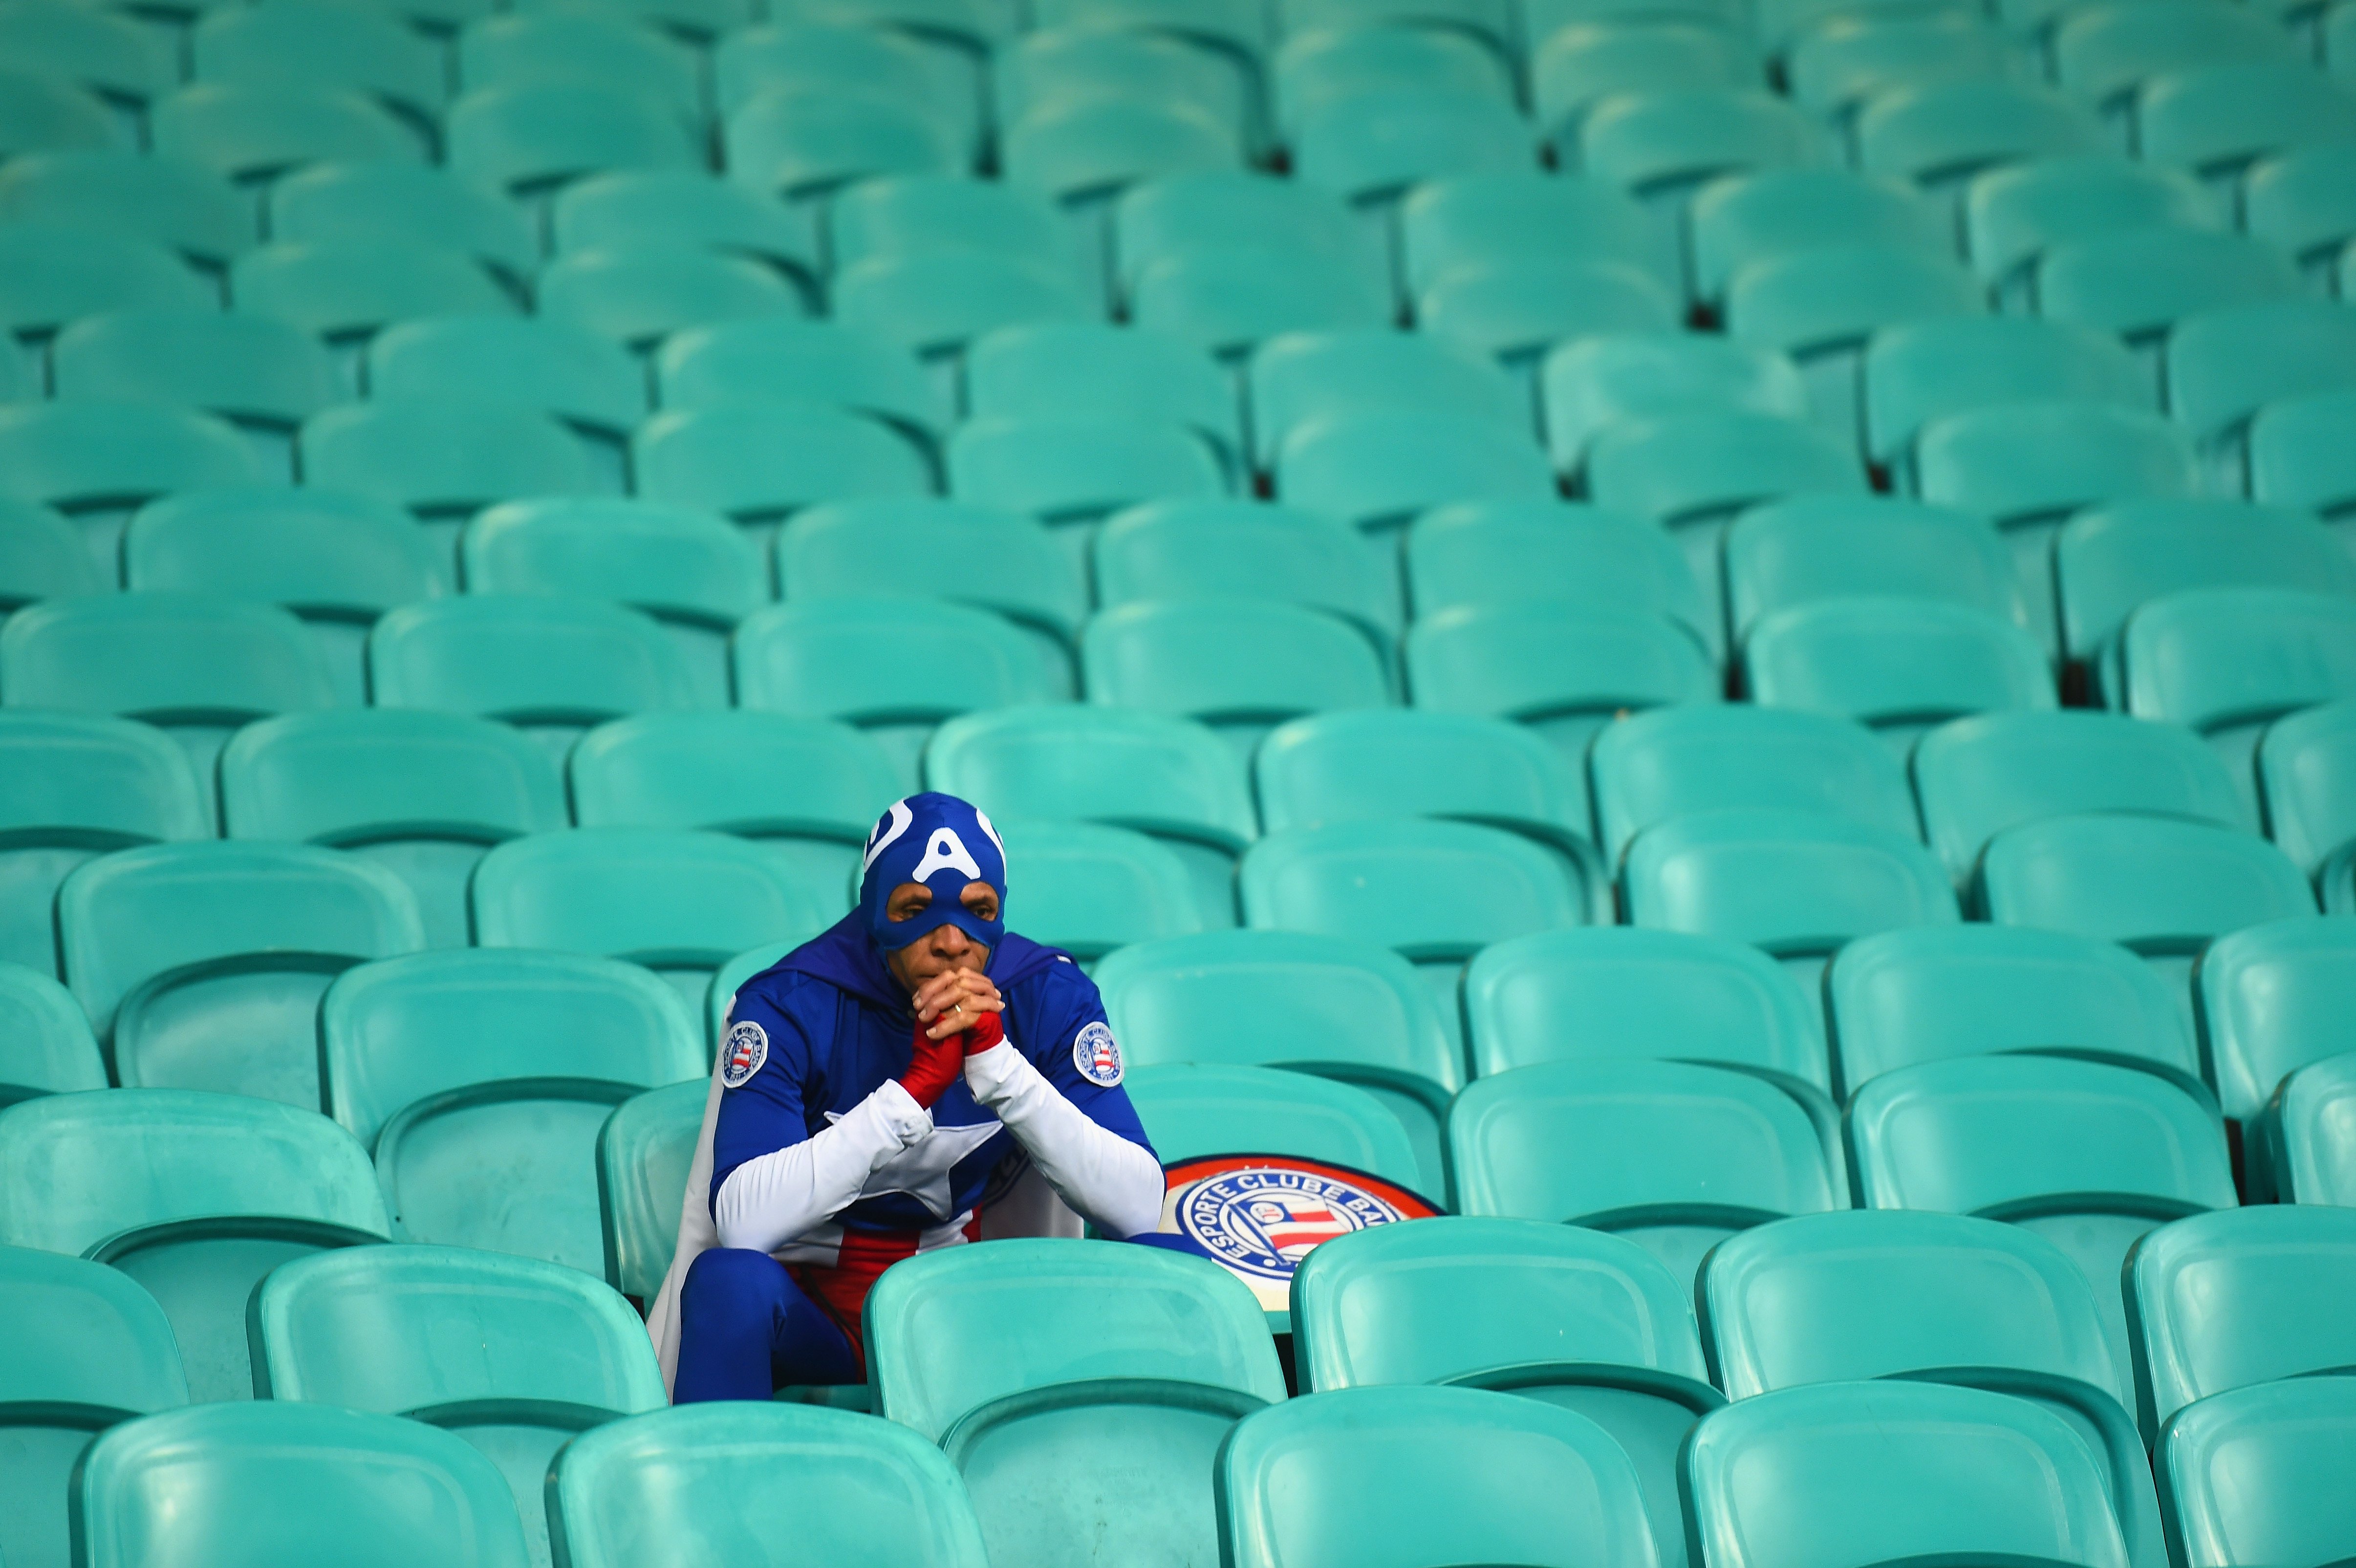 A fan dressed as Captain America looks on after Belgium's 2-1 victory in extra time during the match between Belgium and the United States at Arena Fonte Nova on July 1, 2014 in Salvador, Brazil.